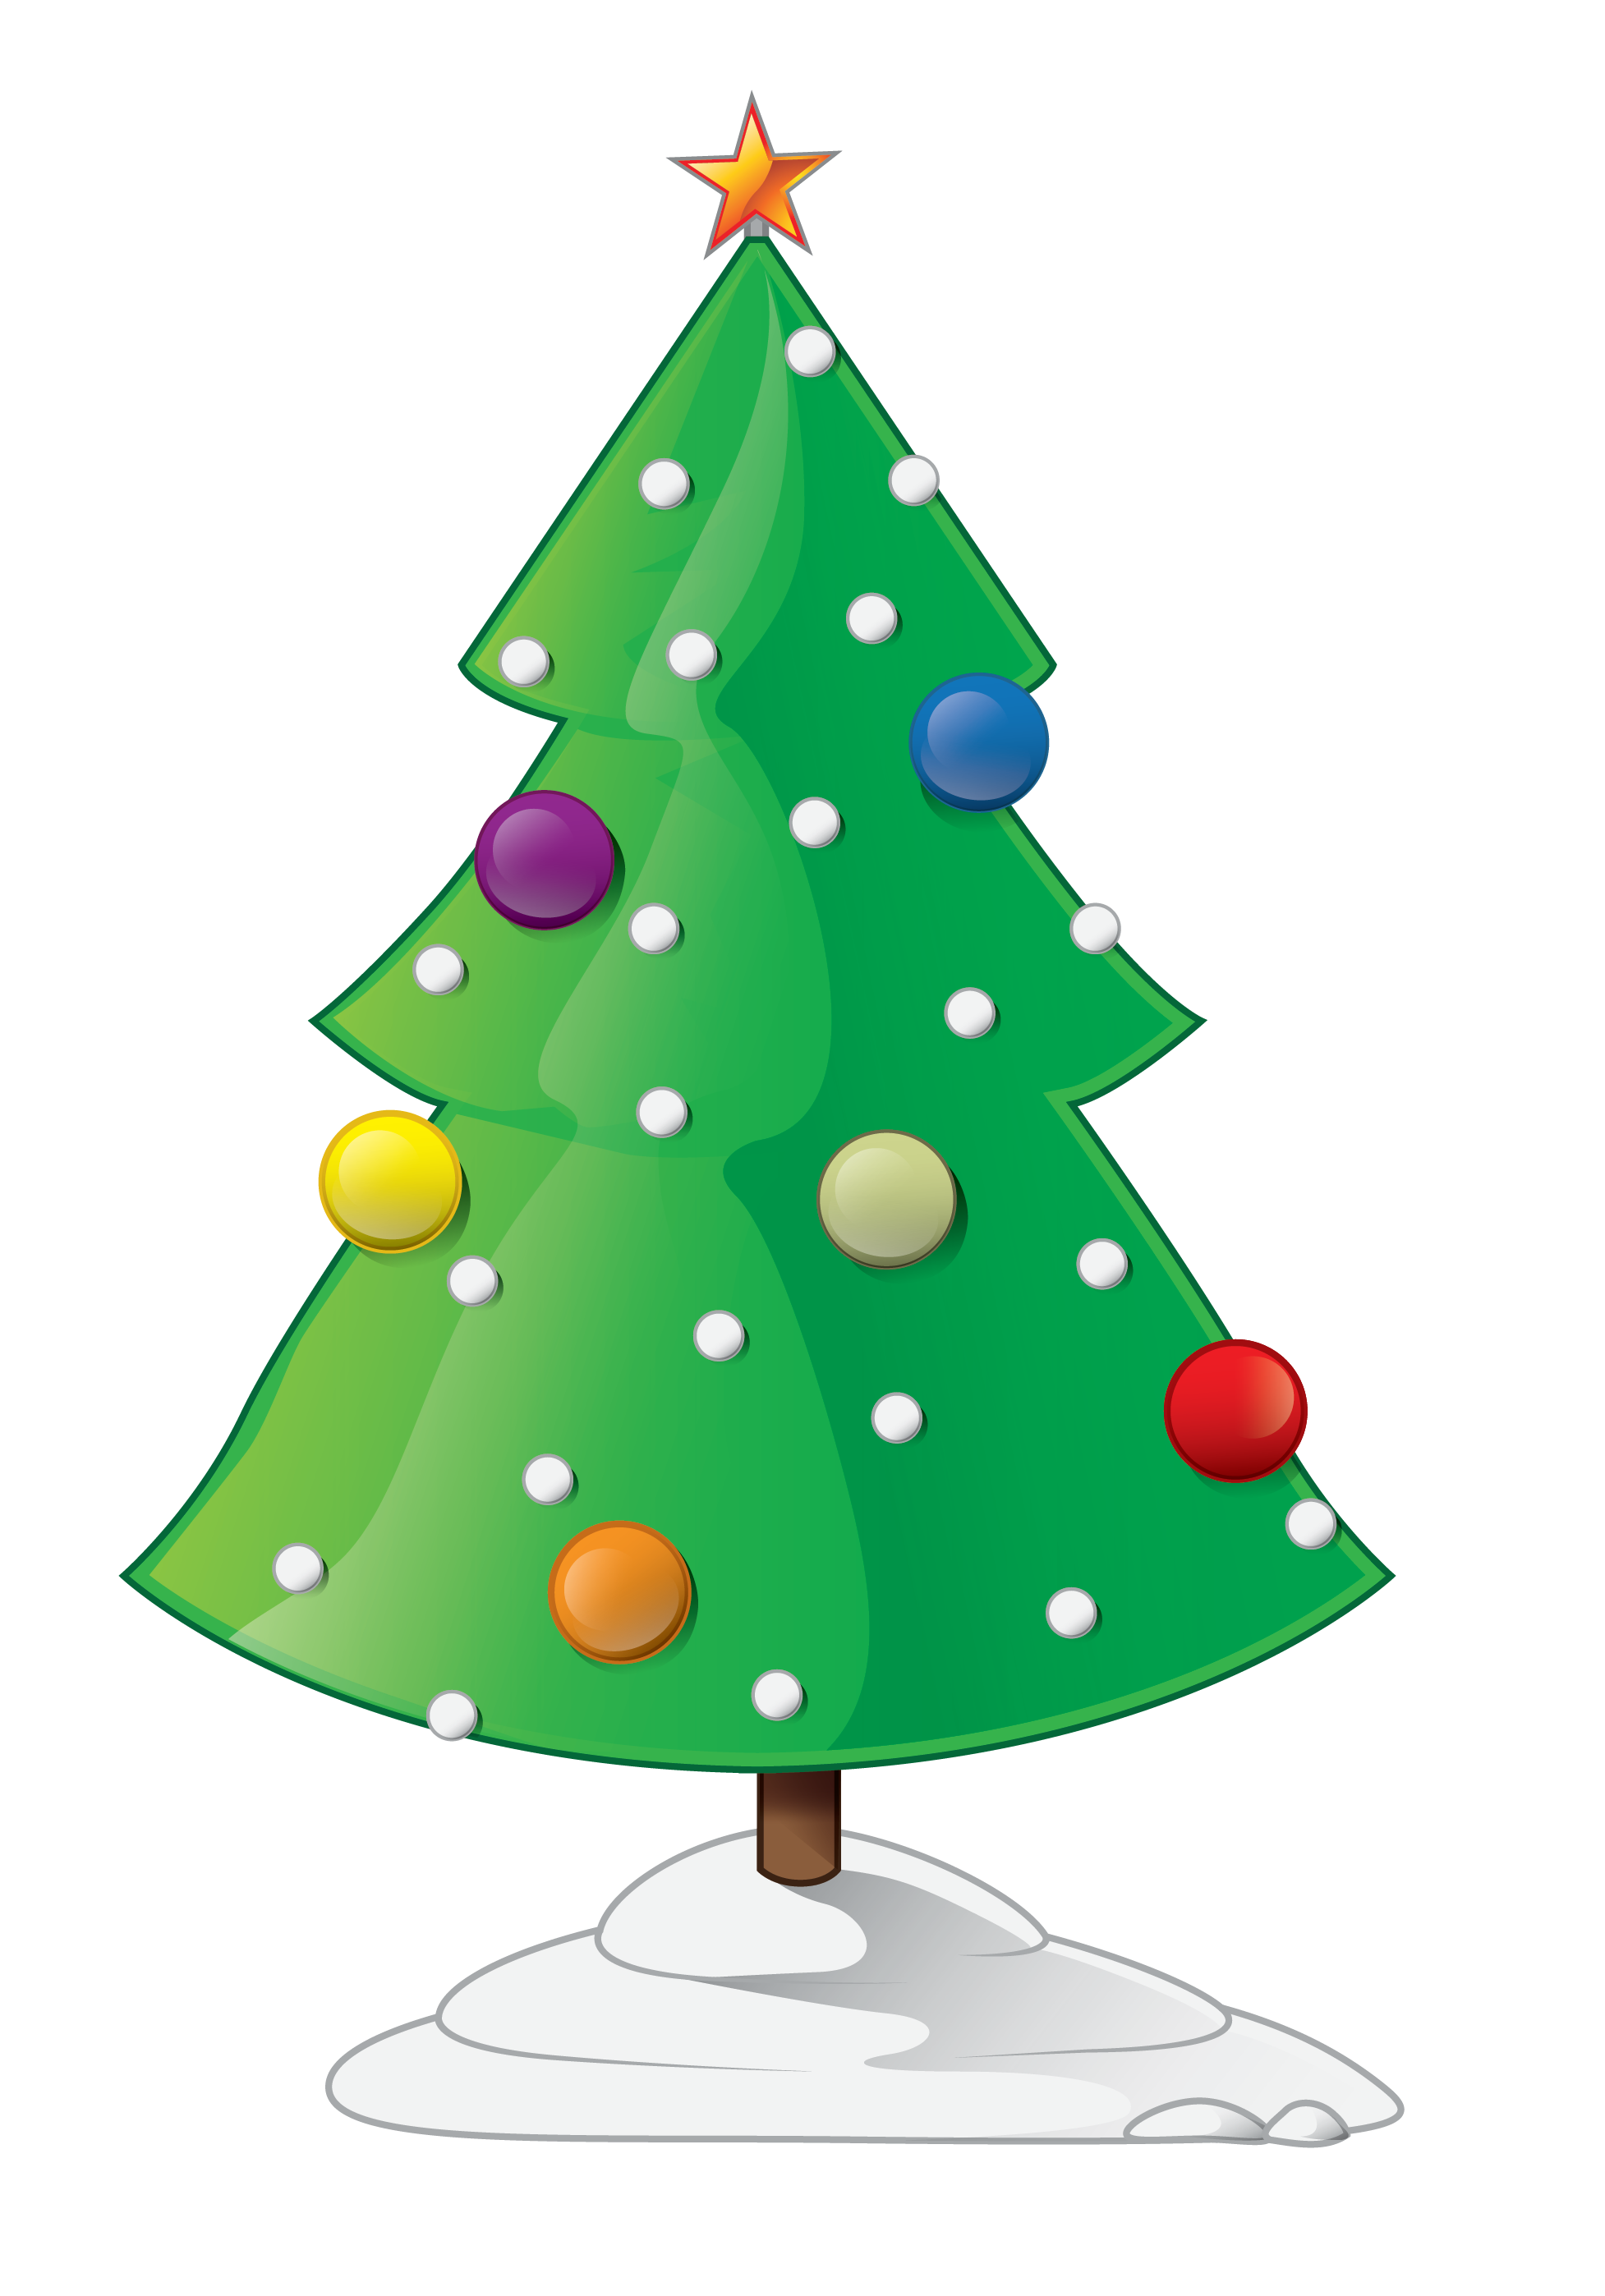 Pictures Of Cartoon Christmas Trees - Cliparts.co